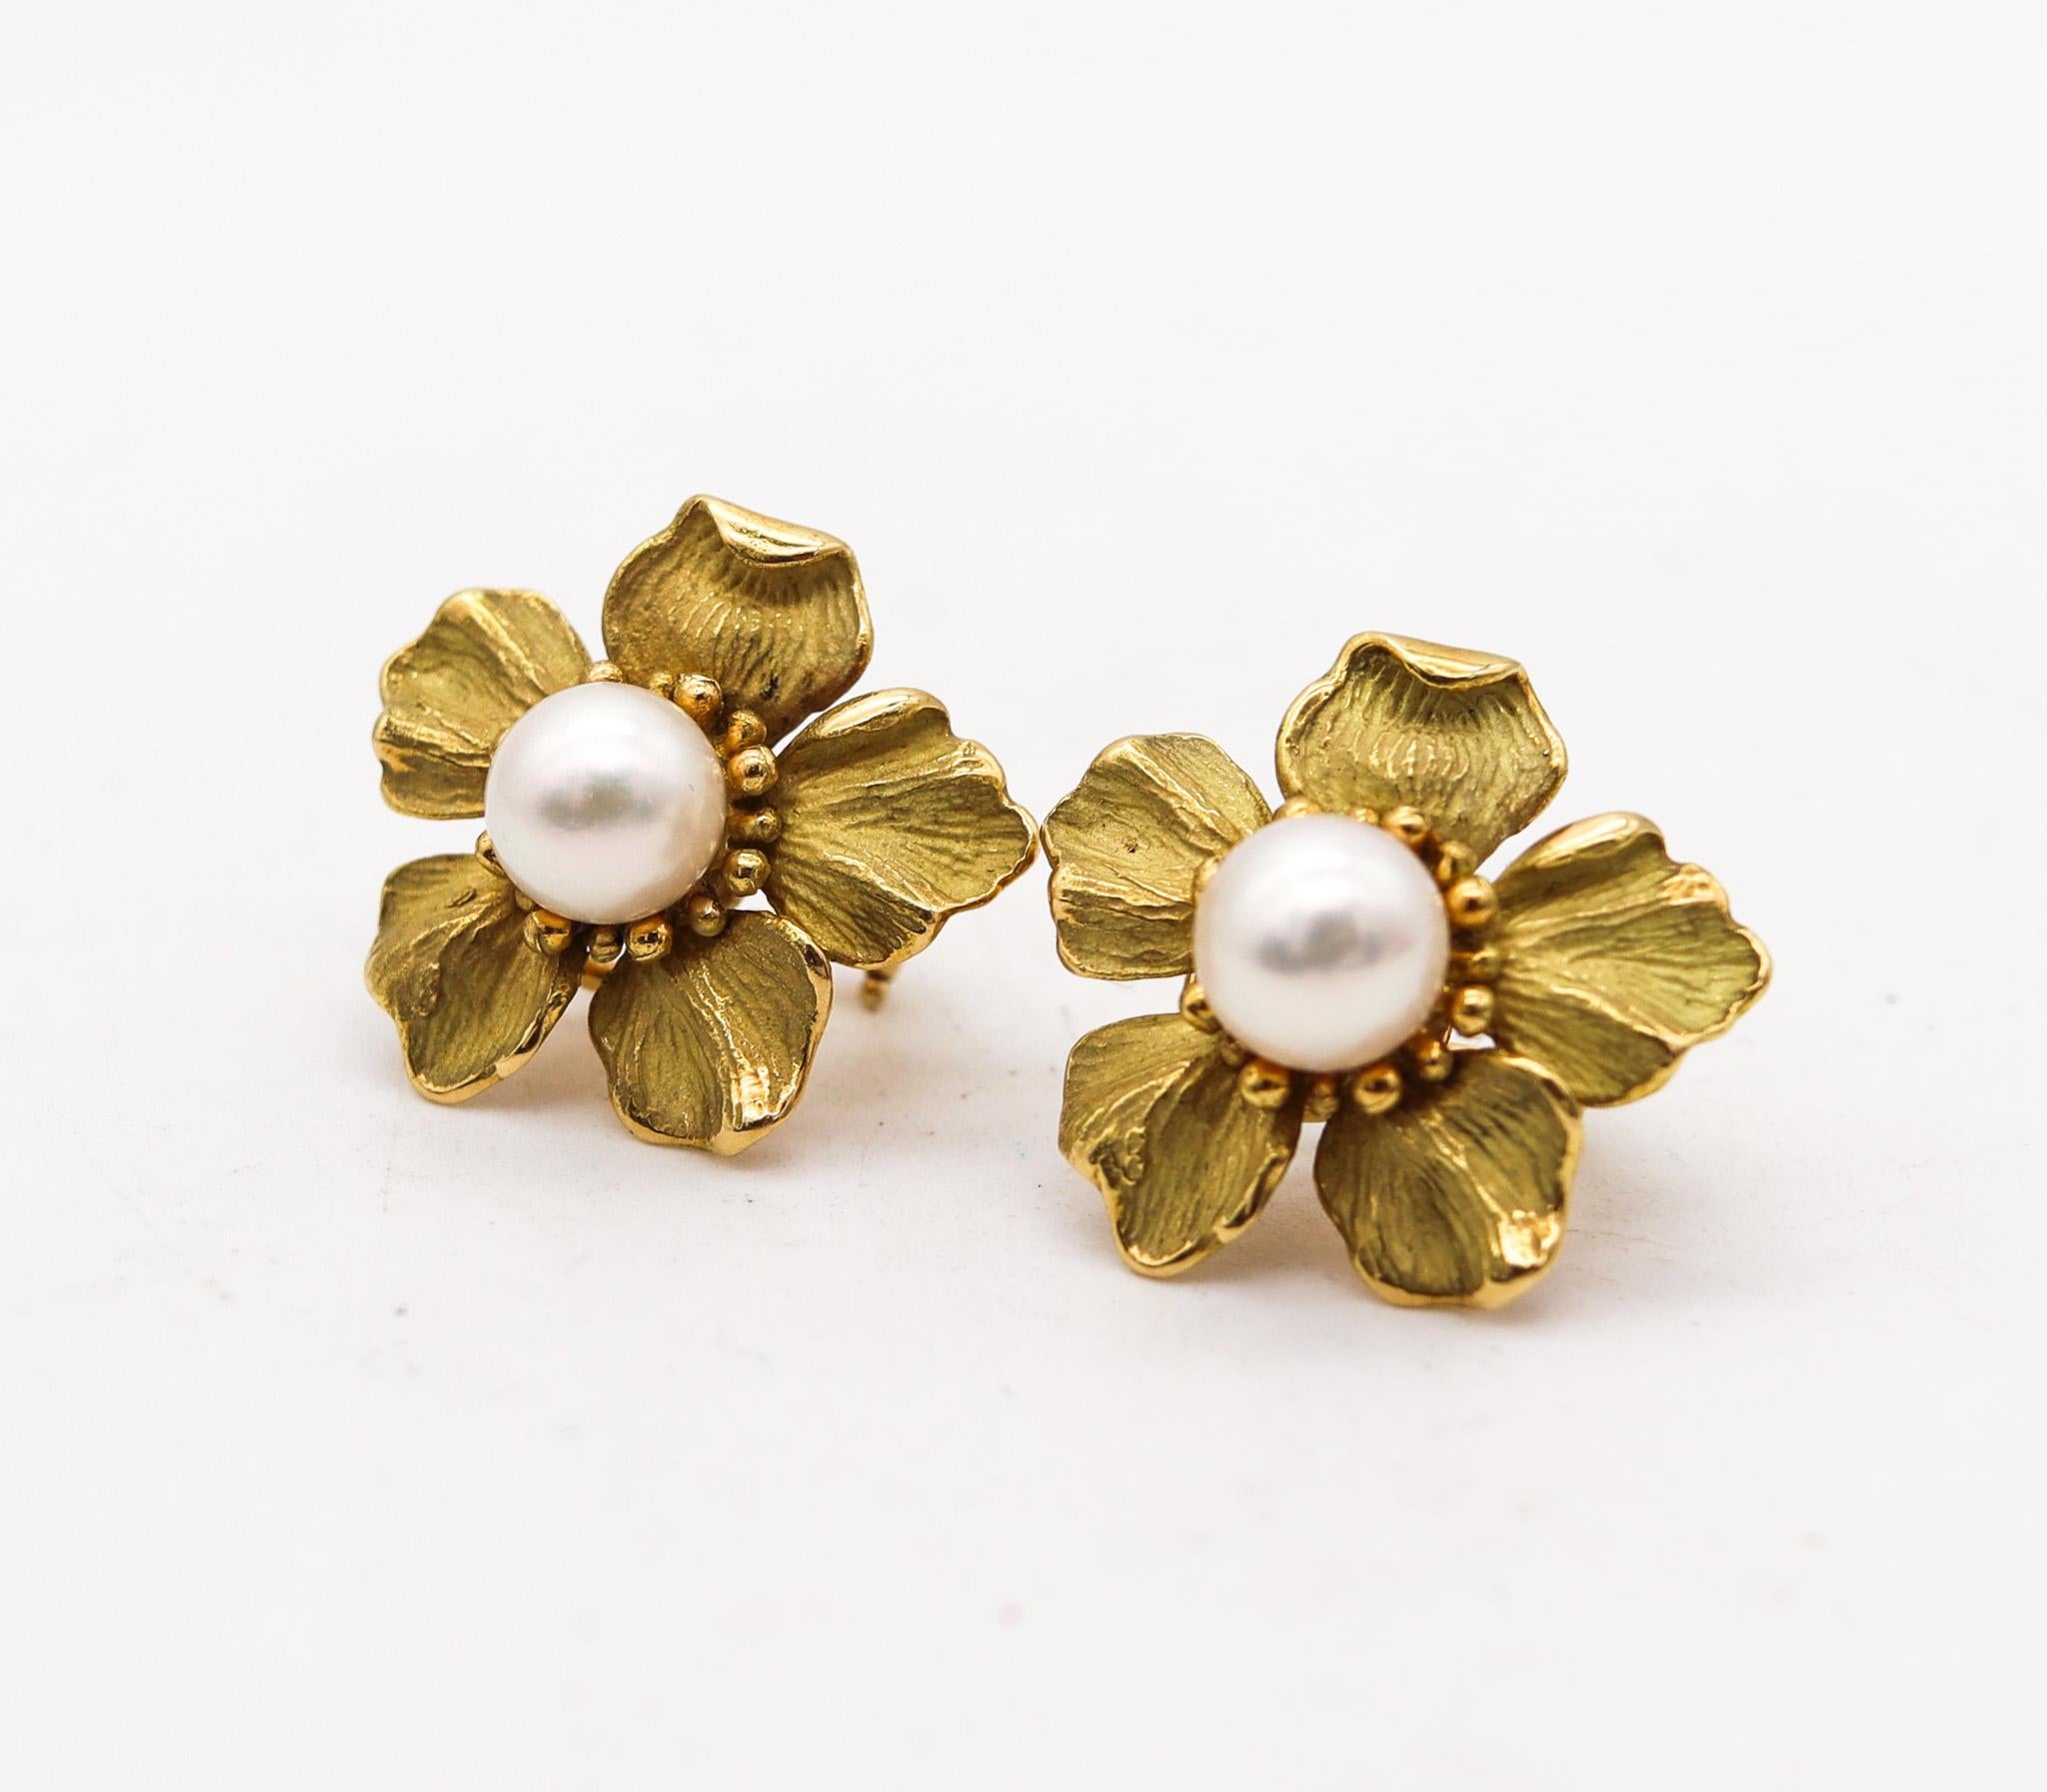 Pair of earrings designed by Tiffany & Co.

Very nice pair of clips earrings, created by Tiffany & Co. back in the 1980. They were crafted with the organic motif of a five-petals flower in solid yellow gold of 18 karats with textured finish. Fitted